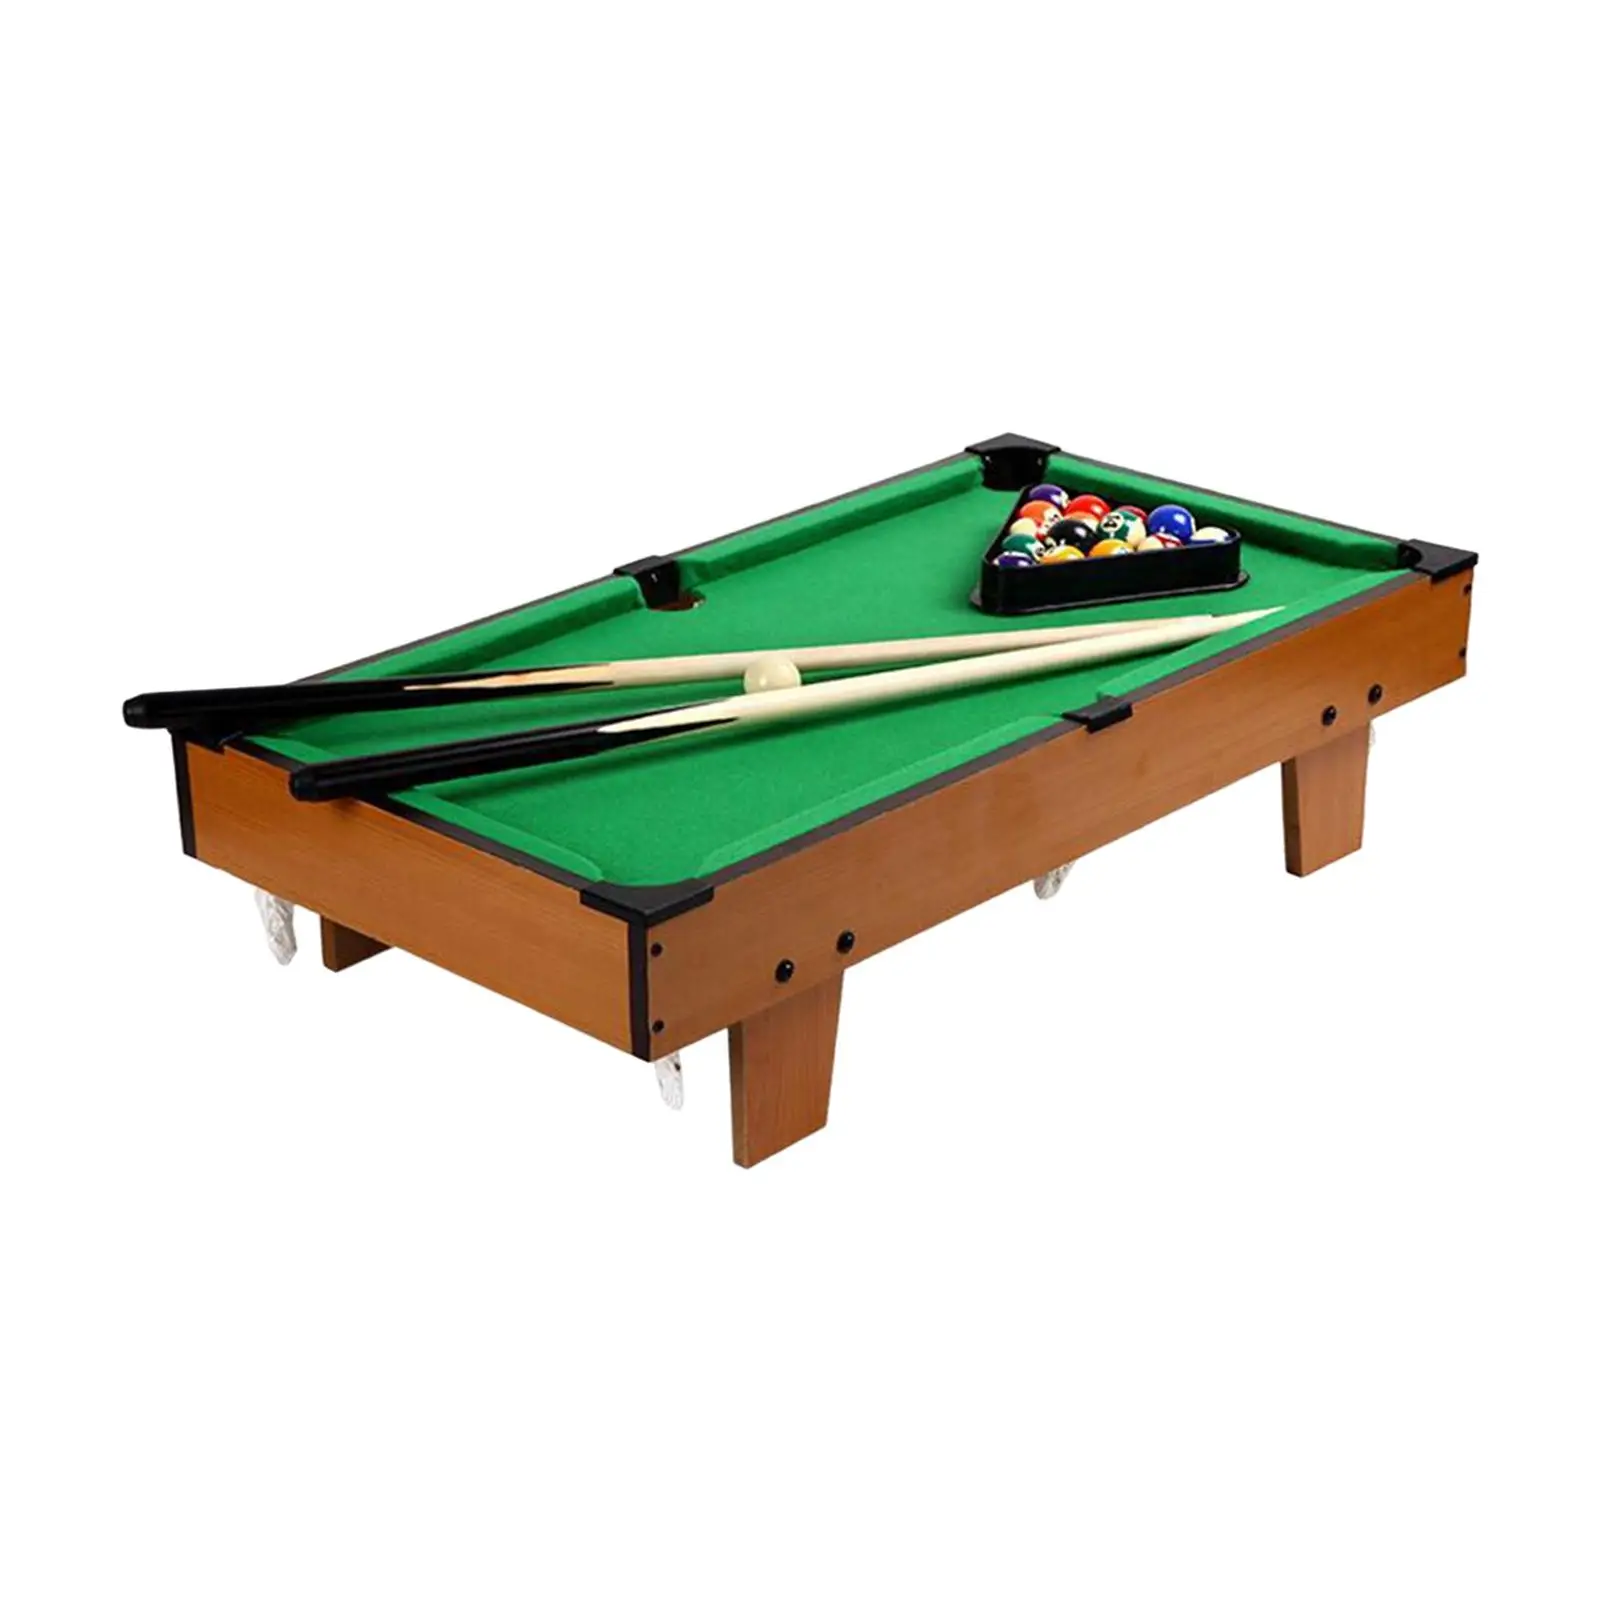 Pool Table Set Game Toy Chalk, Triangle Board Games Billiard Cues Leisure Wood